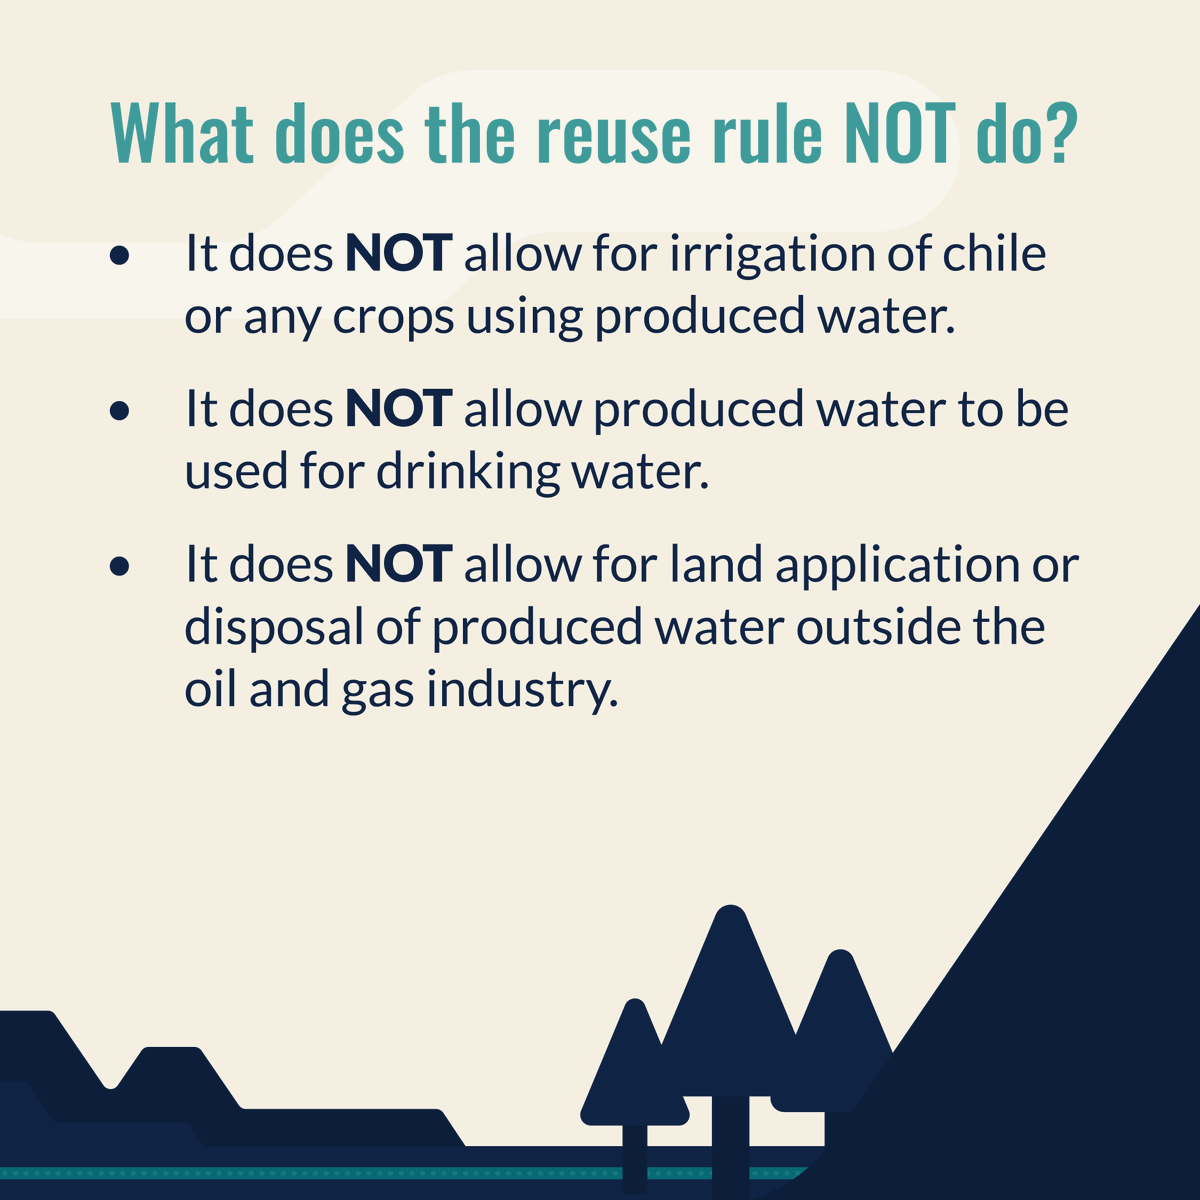 New Mexico's water crisis demands action. We're proposing new water reuse rules to protect our water, NOT allow the release of water leftover from fracking. Swipe left to learn how these regulations protect our water by prohibiting the release produced water.